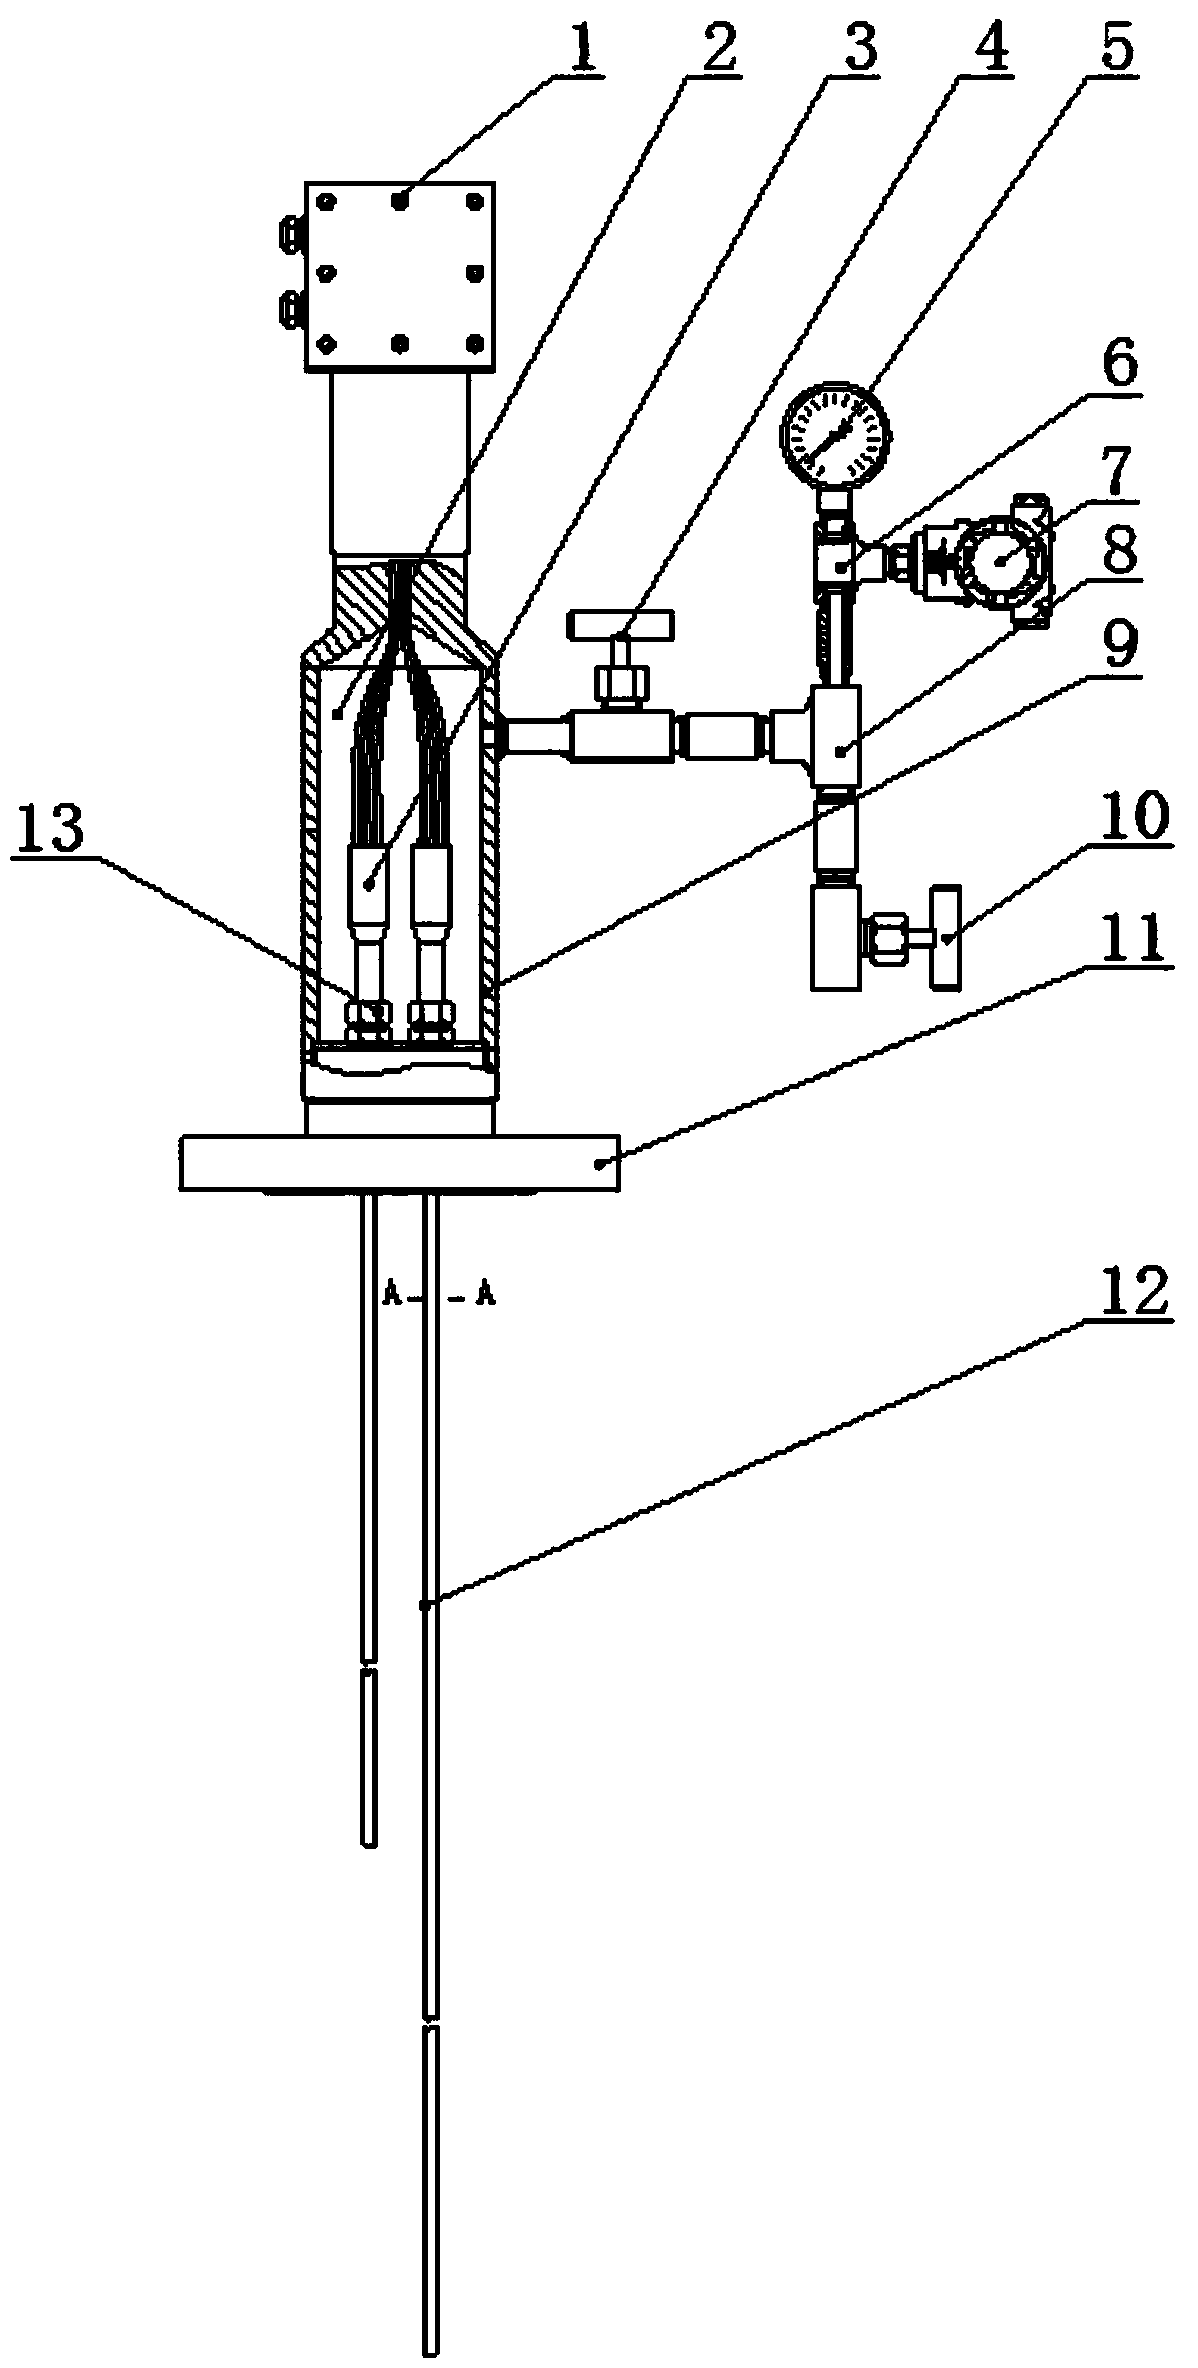 Multi-branch multi-point thermocouple with sealed cavity